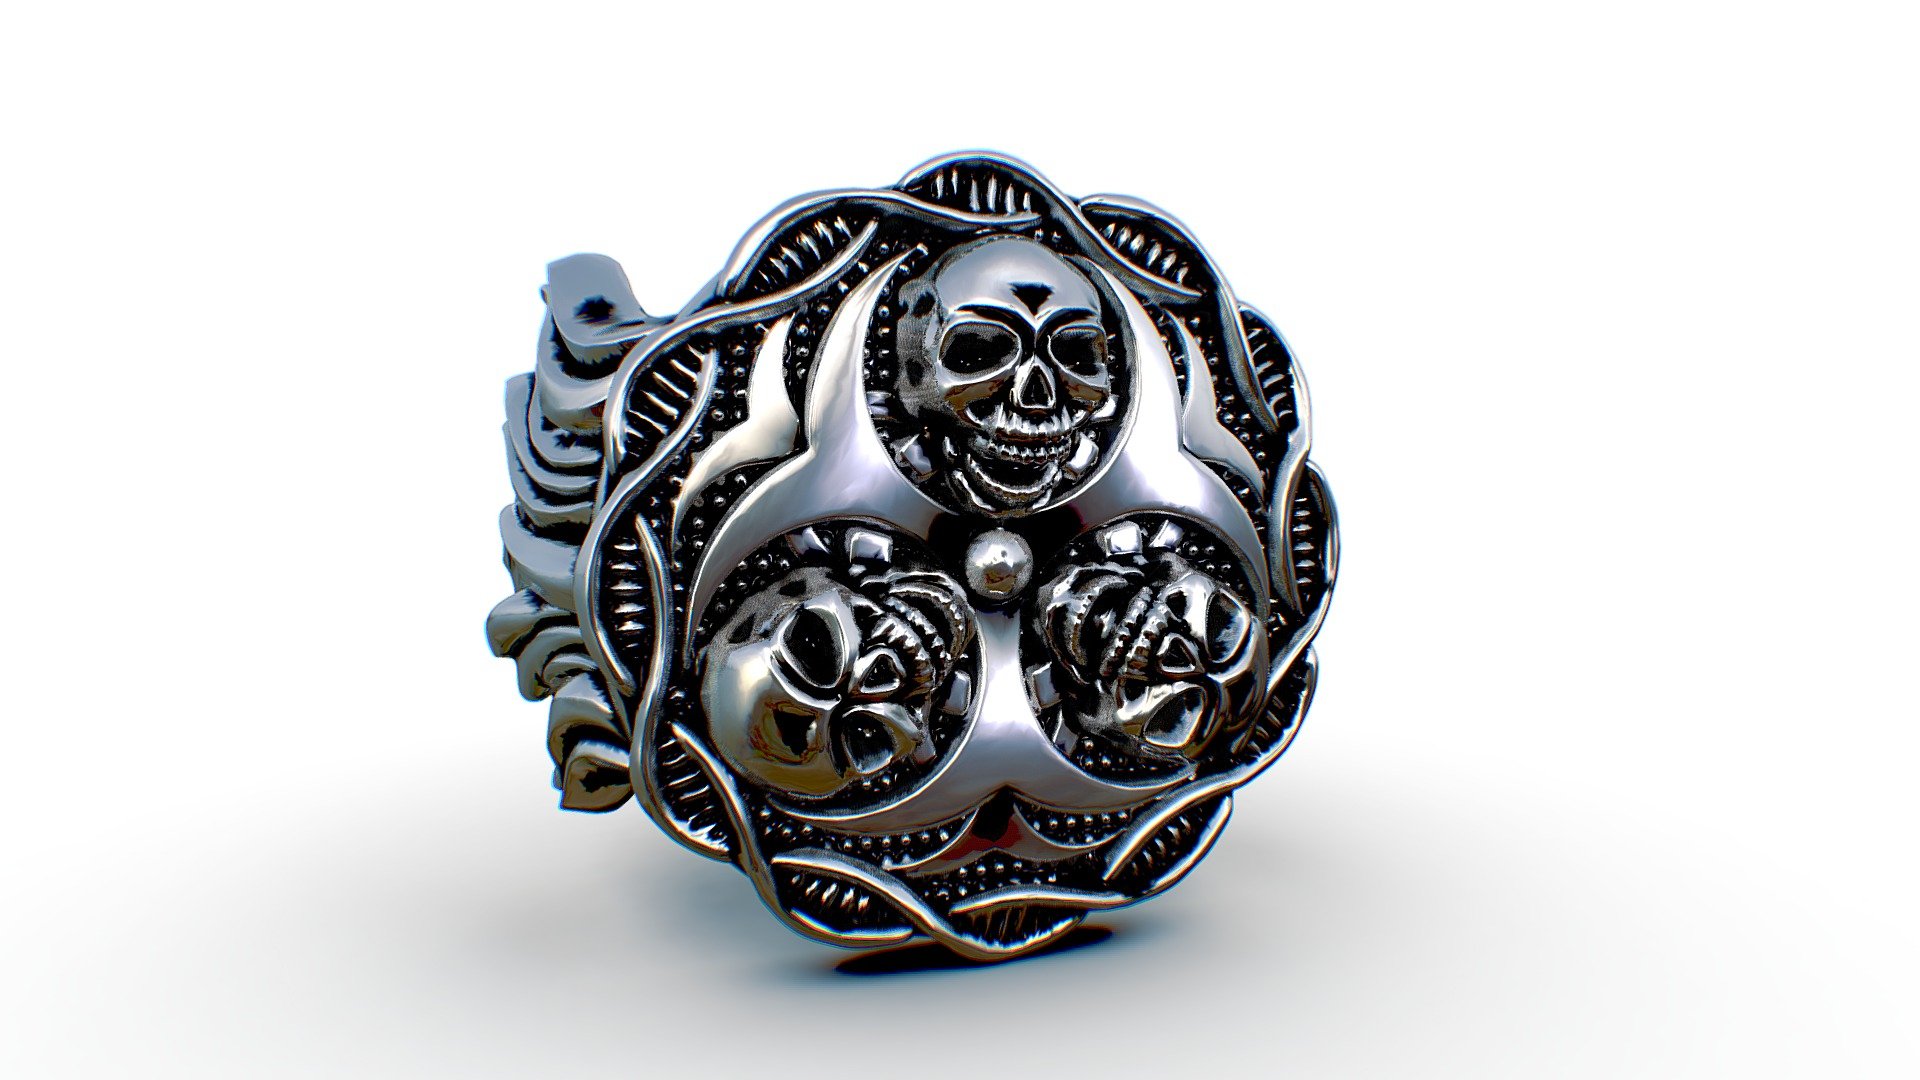 Scull Biohazar Warzone ring diameter 22mm thickness 0.8 mass 13gramm in silver. Author's work. © 2020 Mihail Burmistrov All Rights Reserved
Take care of yourself and others 3d model